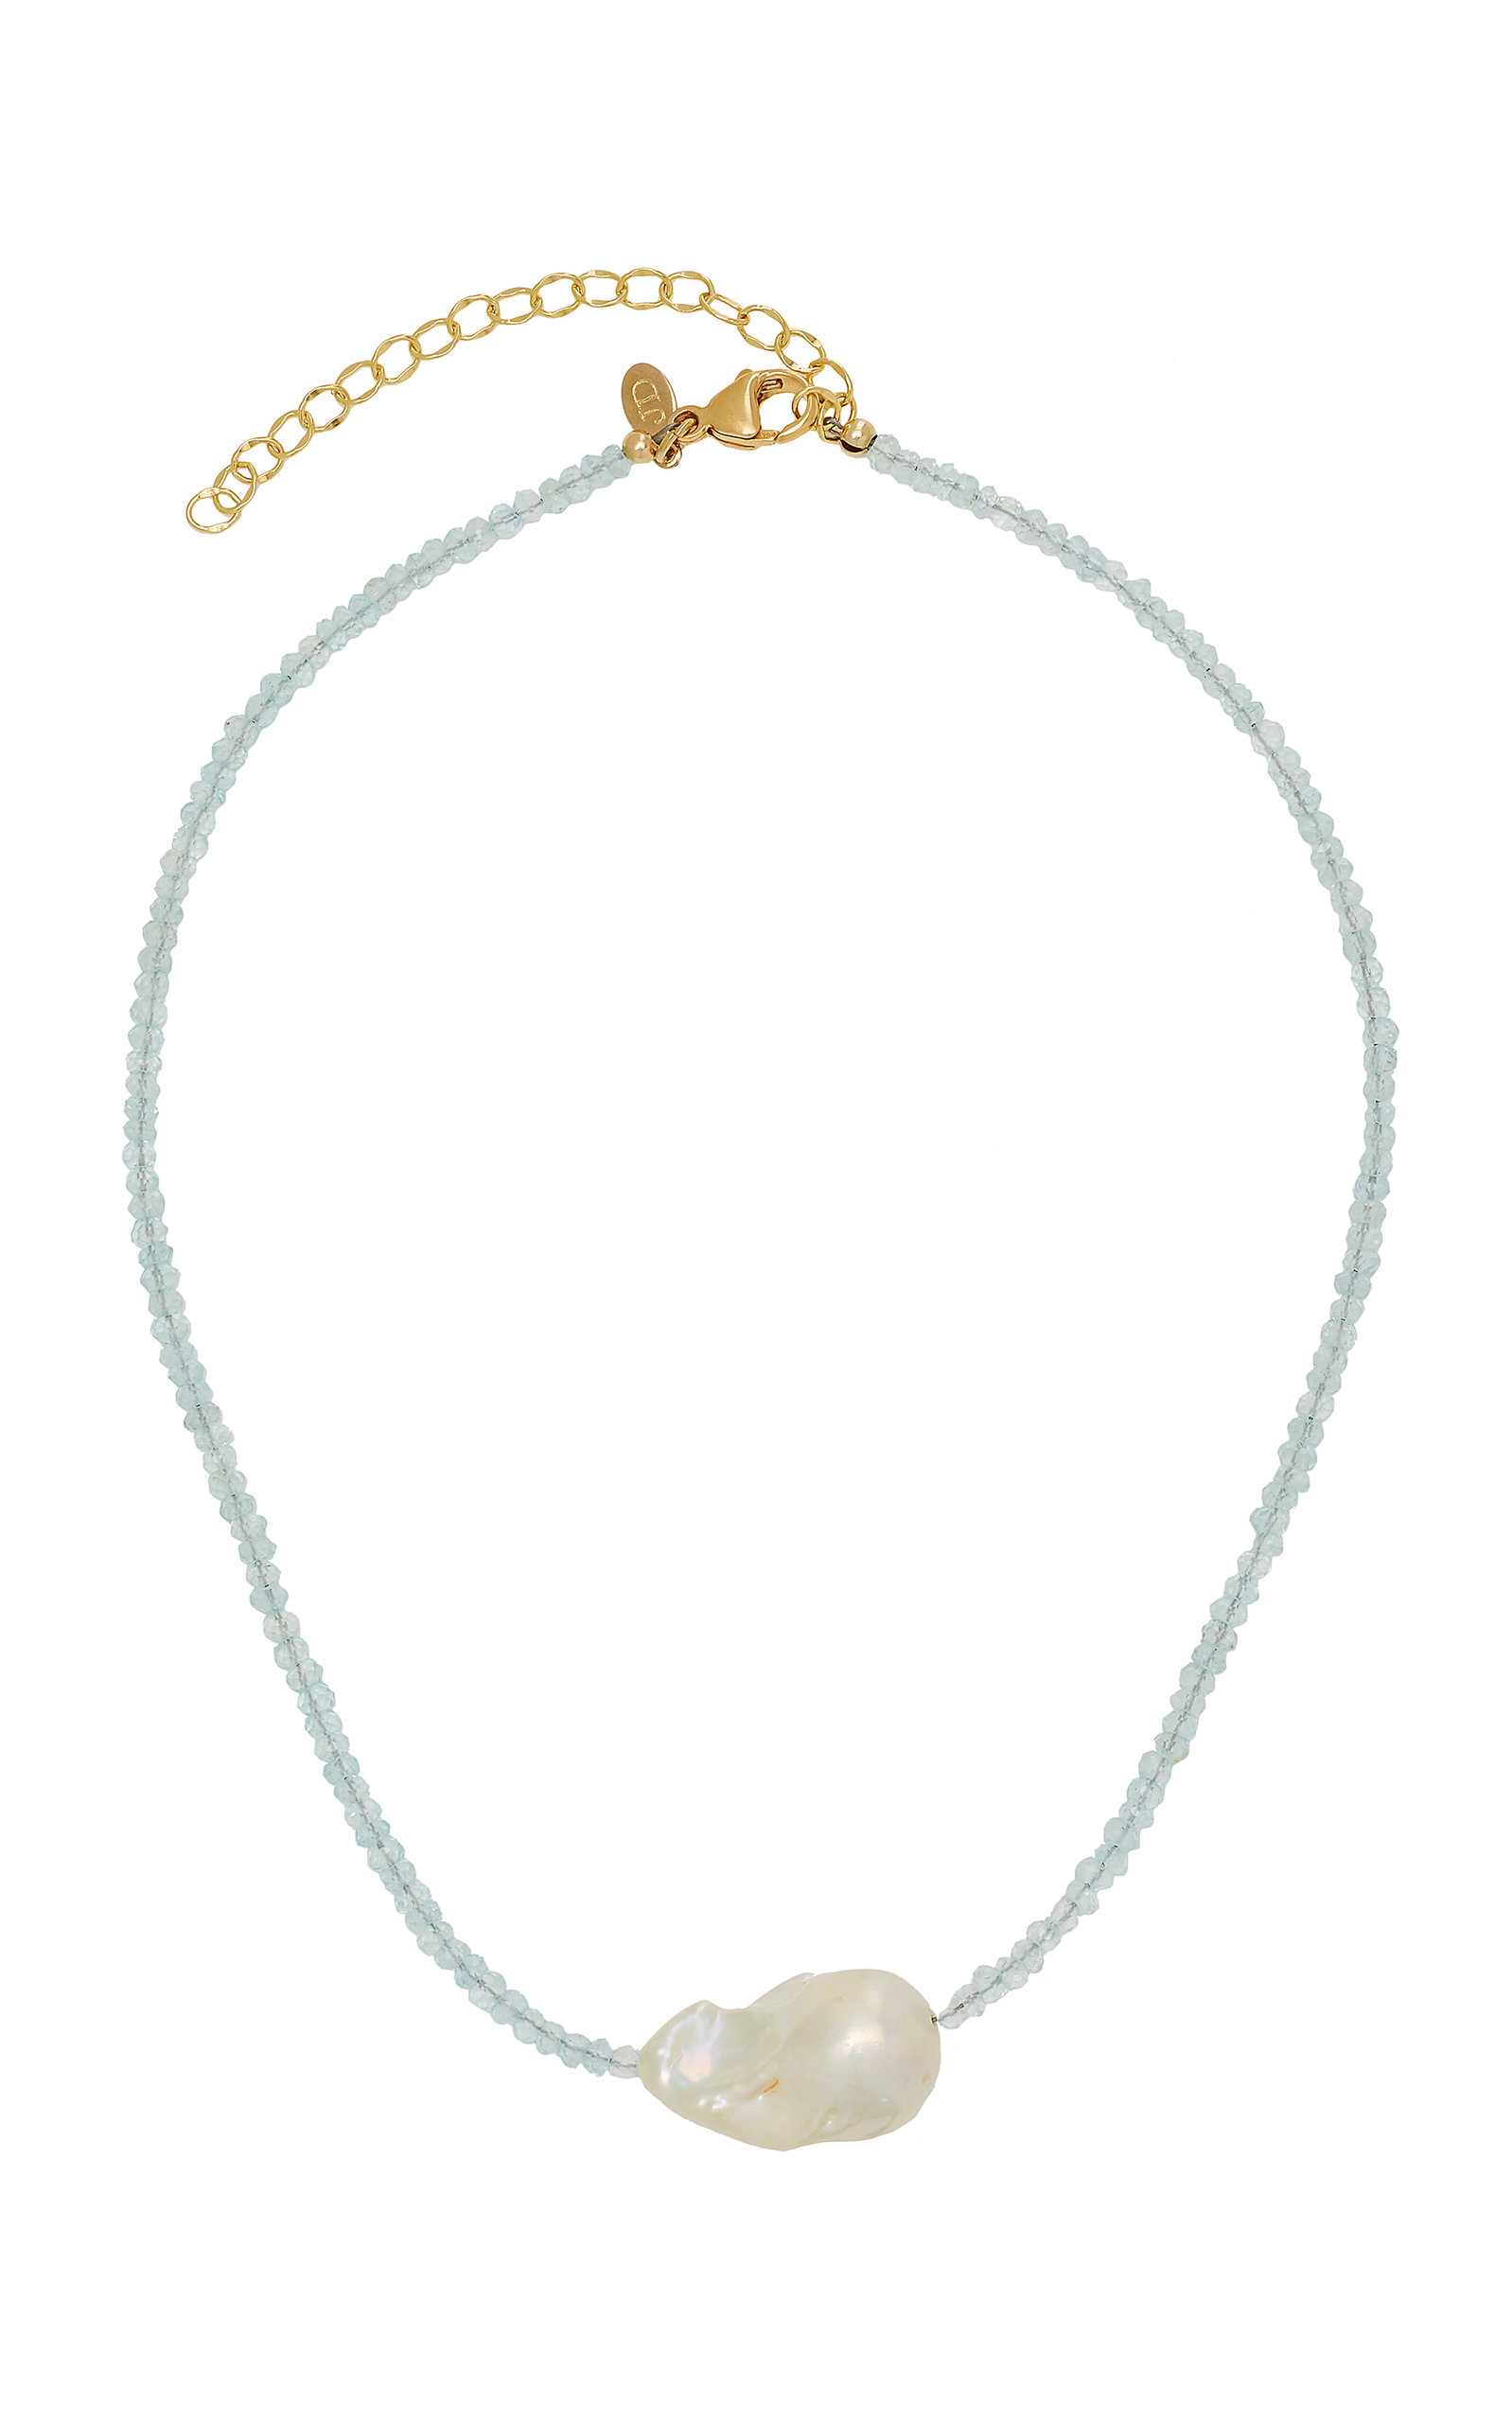 Gold-Filled; Aquamarine and Pearl Necklace